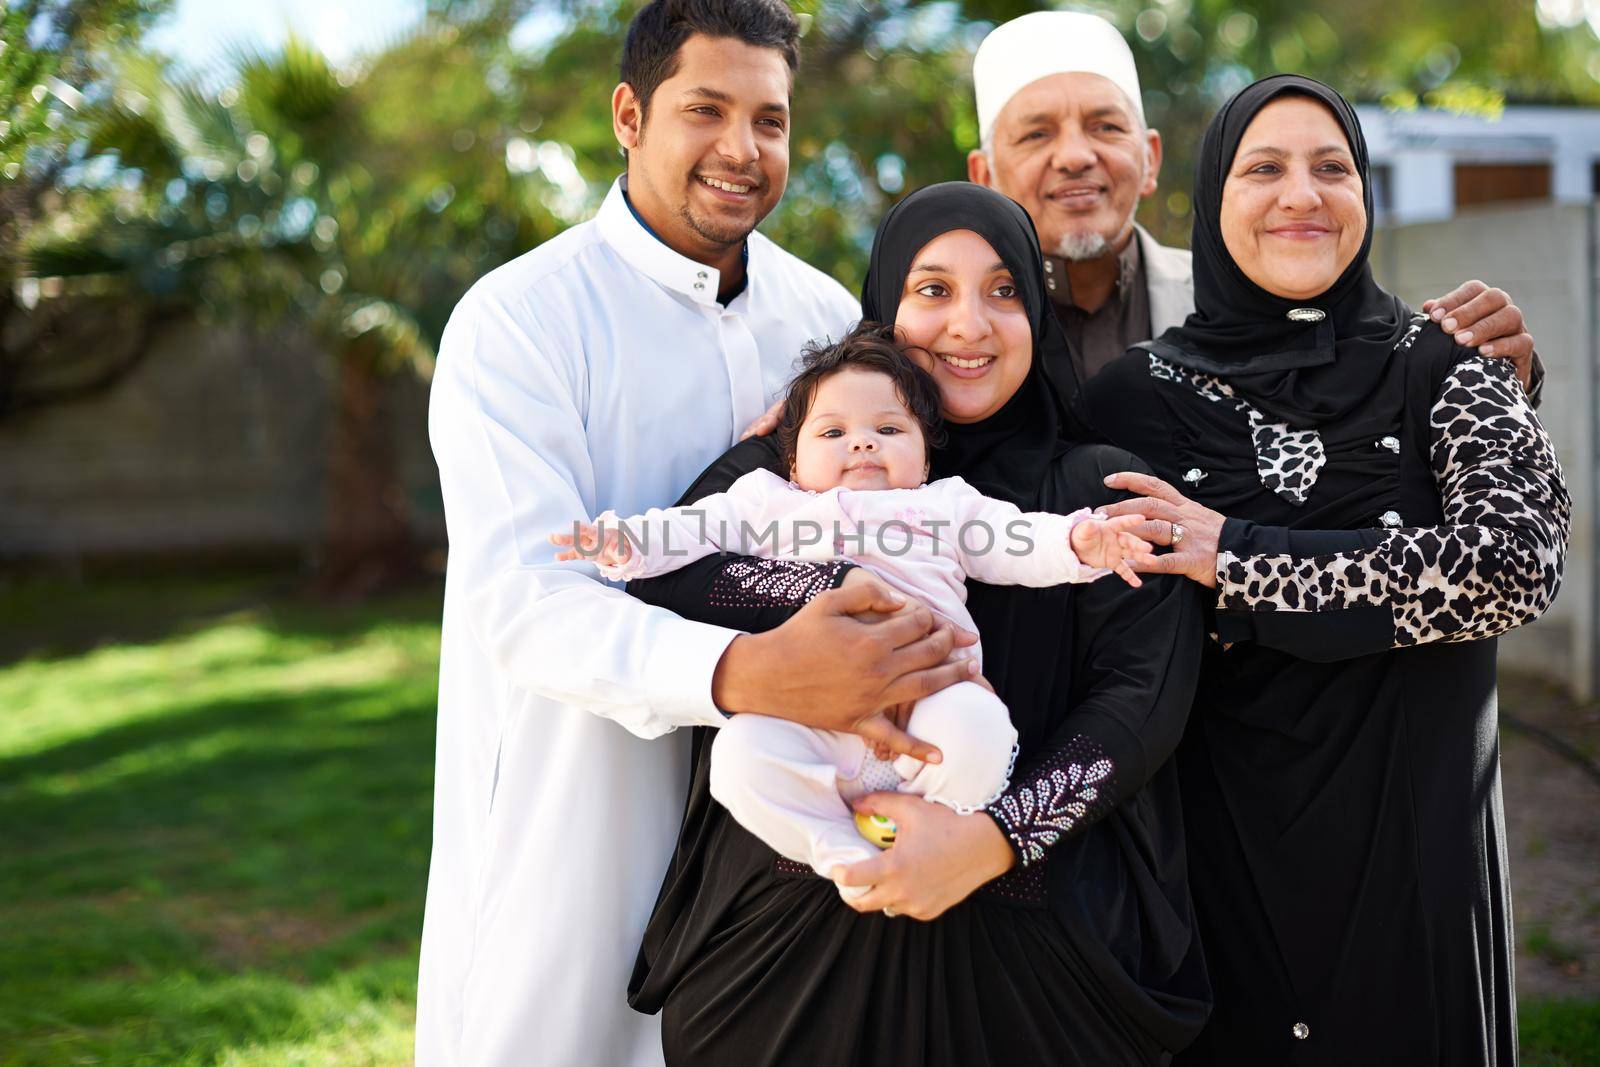 Three generations of love. A muslim family enjoying a day outside